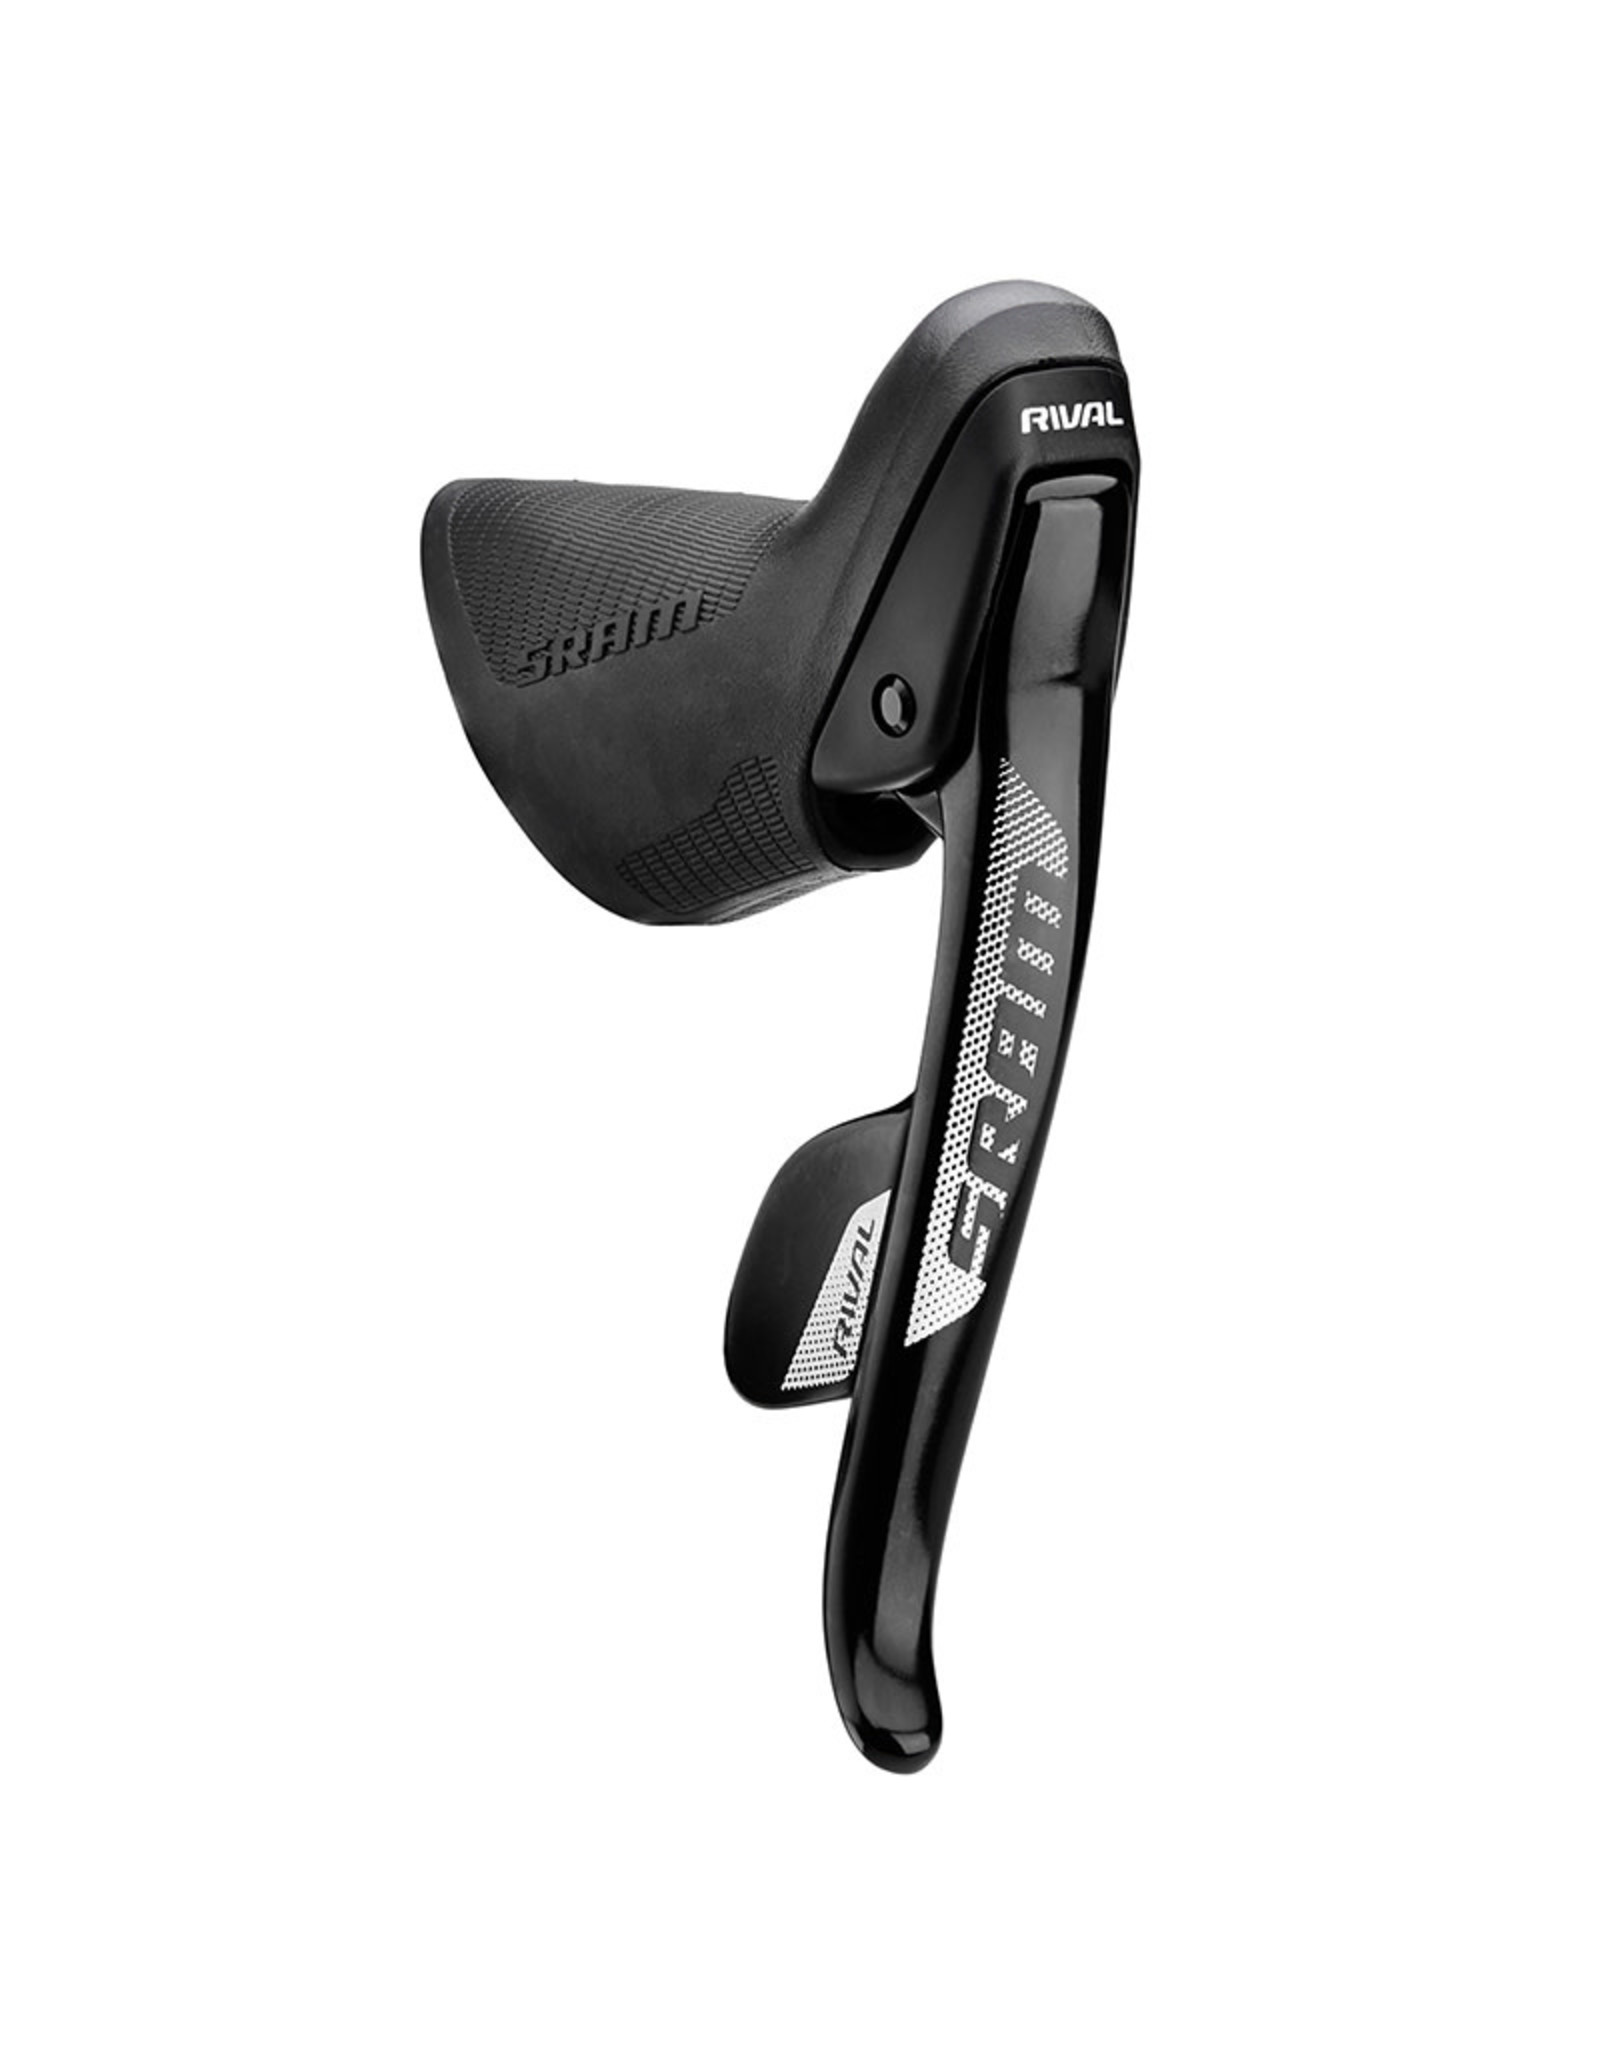 SRAM SRAM Rival 22 DoubleTap Right Lever for Cable Actuated Brakes